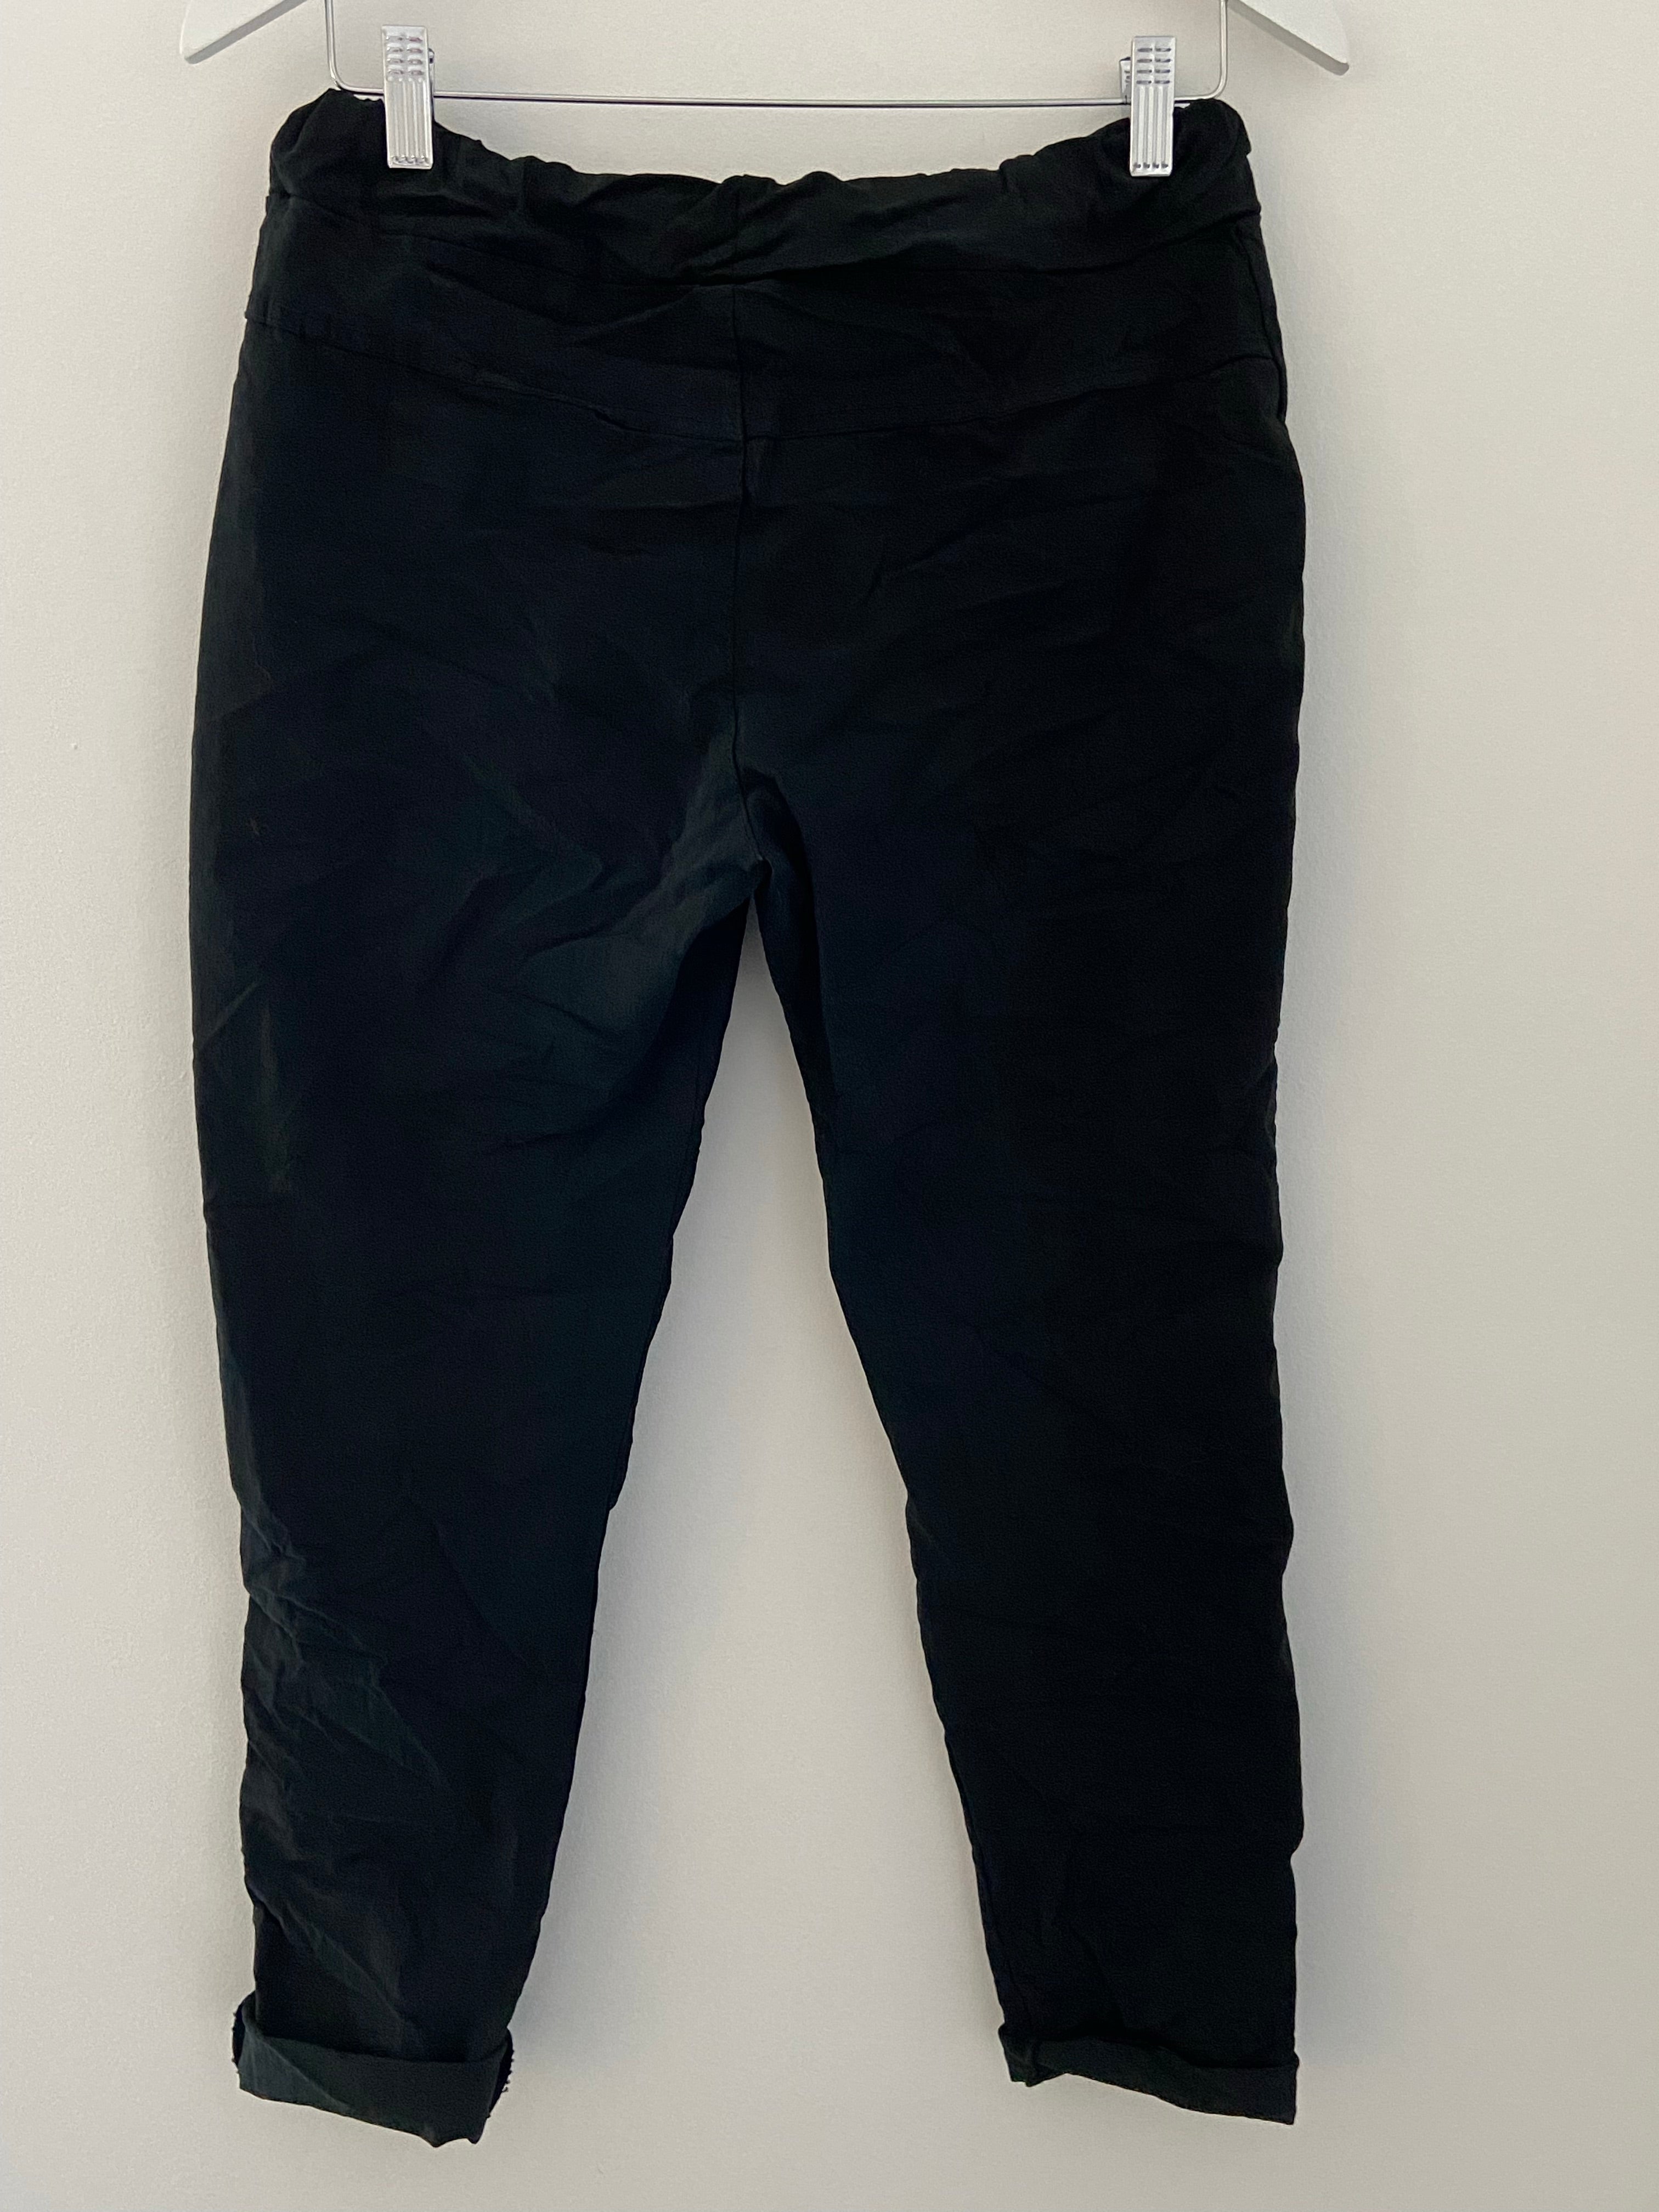 Slimfit Stretch Cotton Joggers in Black